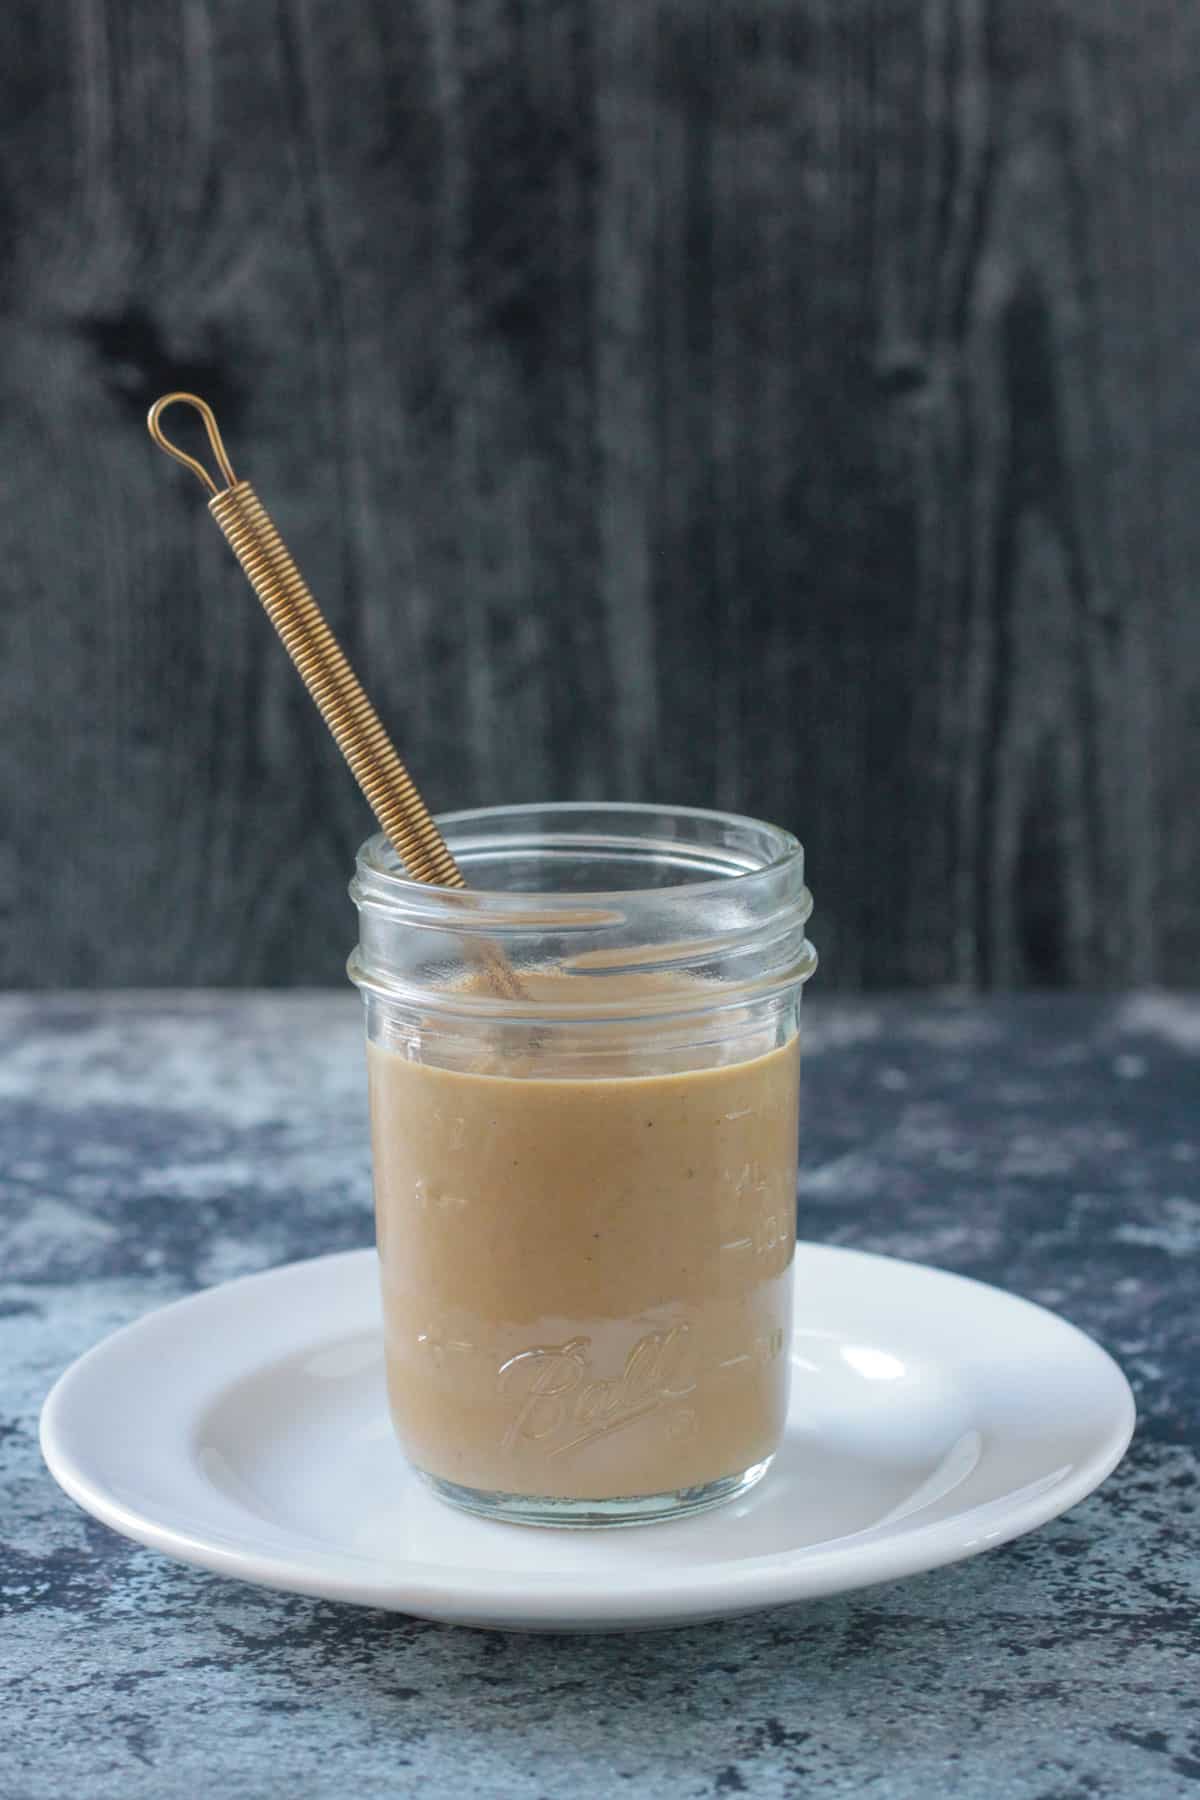 Tahini dressing in a glass jar with a gold colored metal whisk.